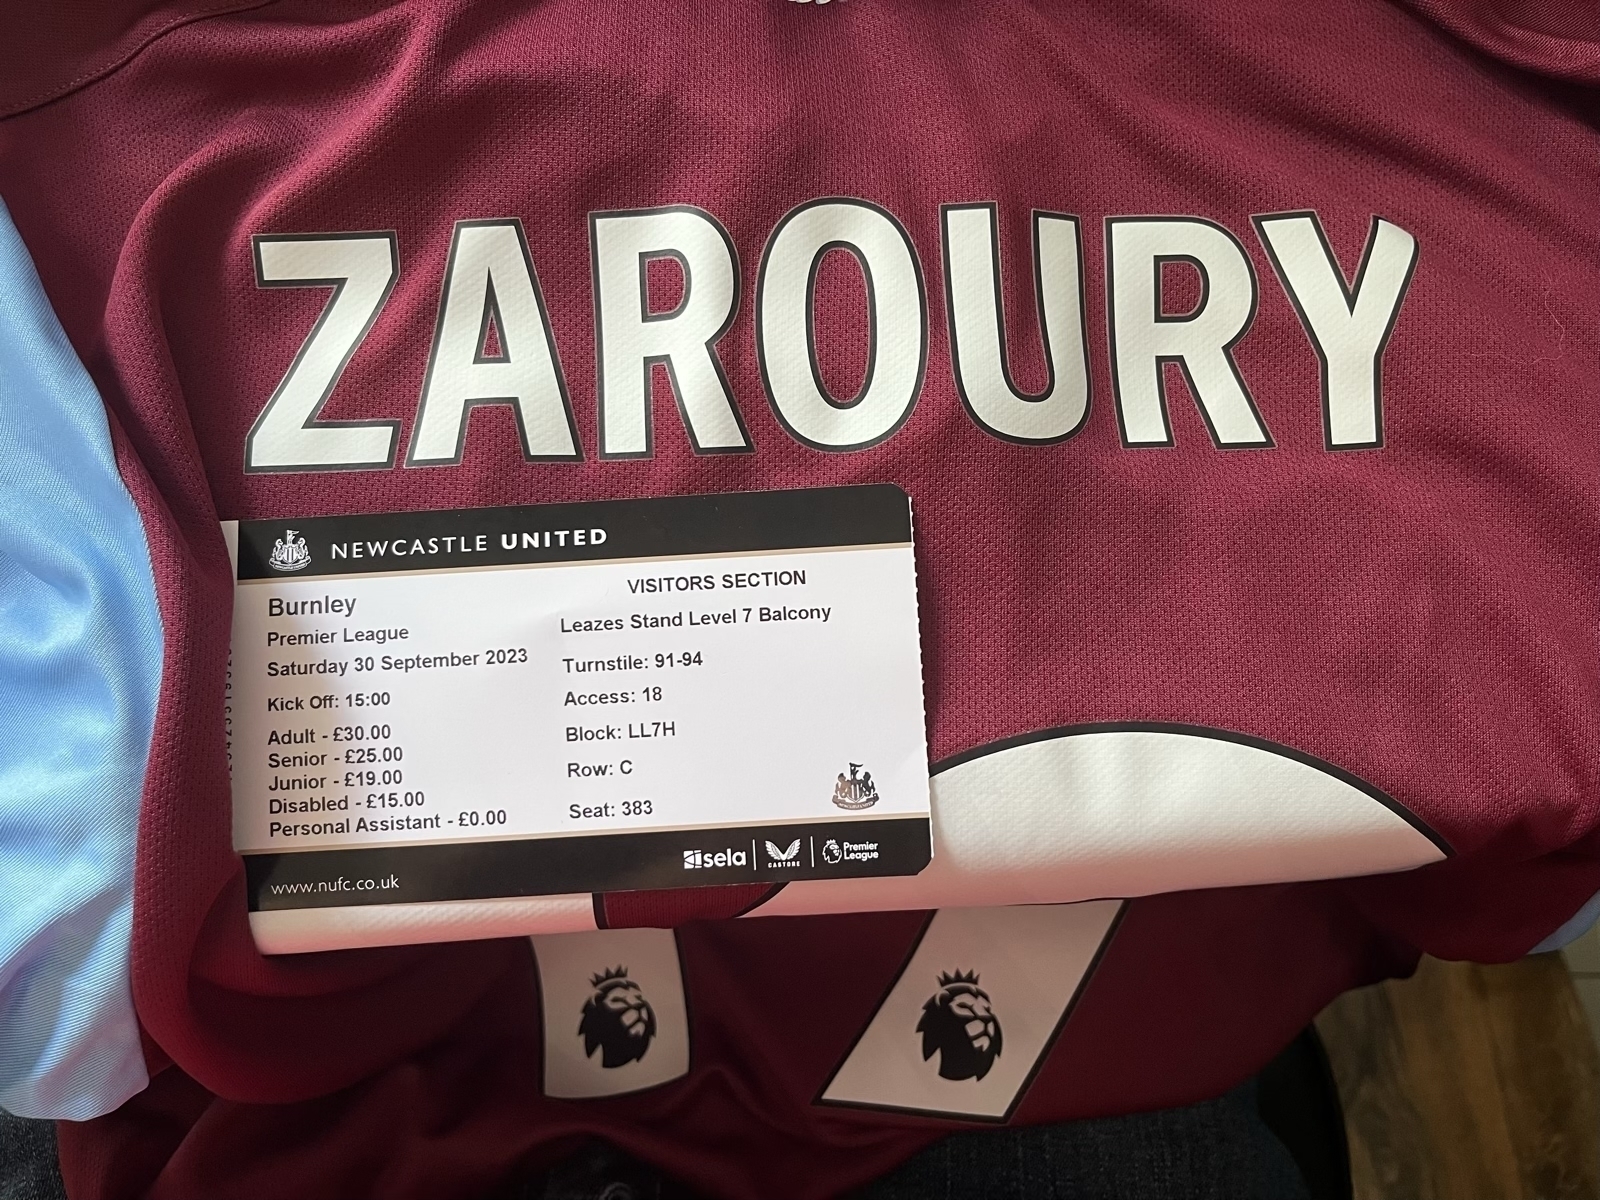 Burnley football shirt and match ticket for Newcastle game